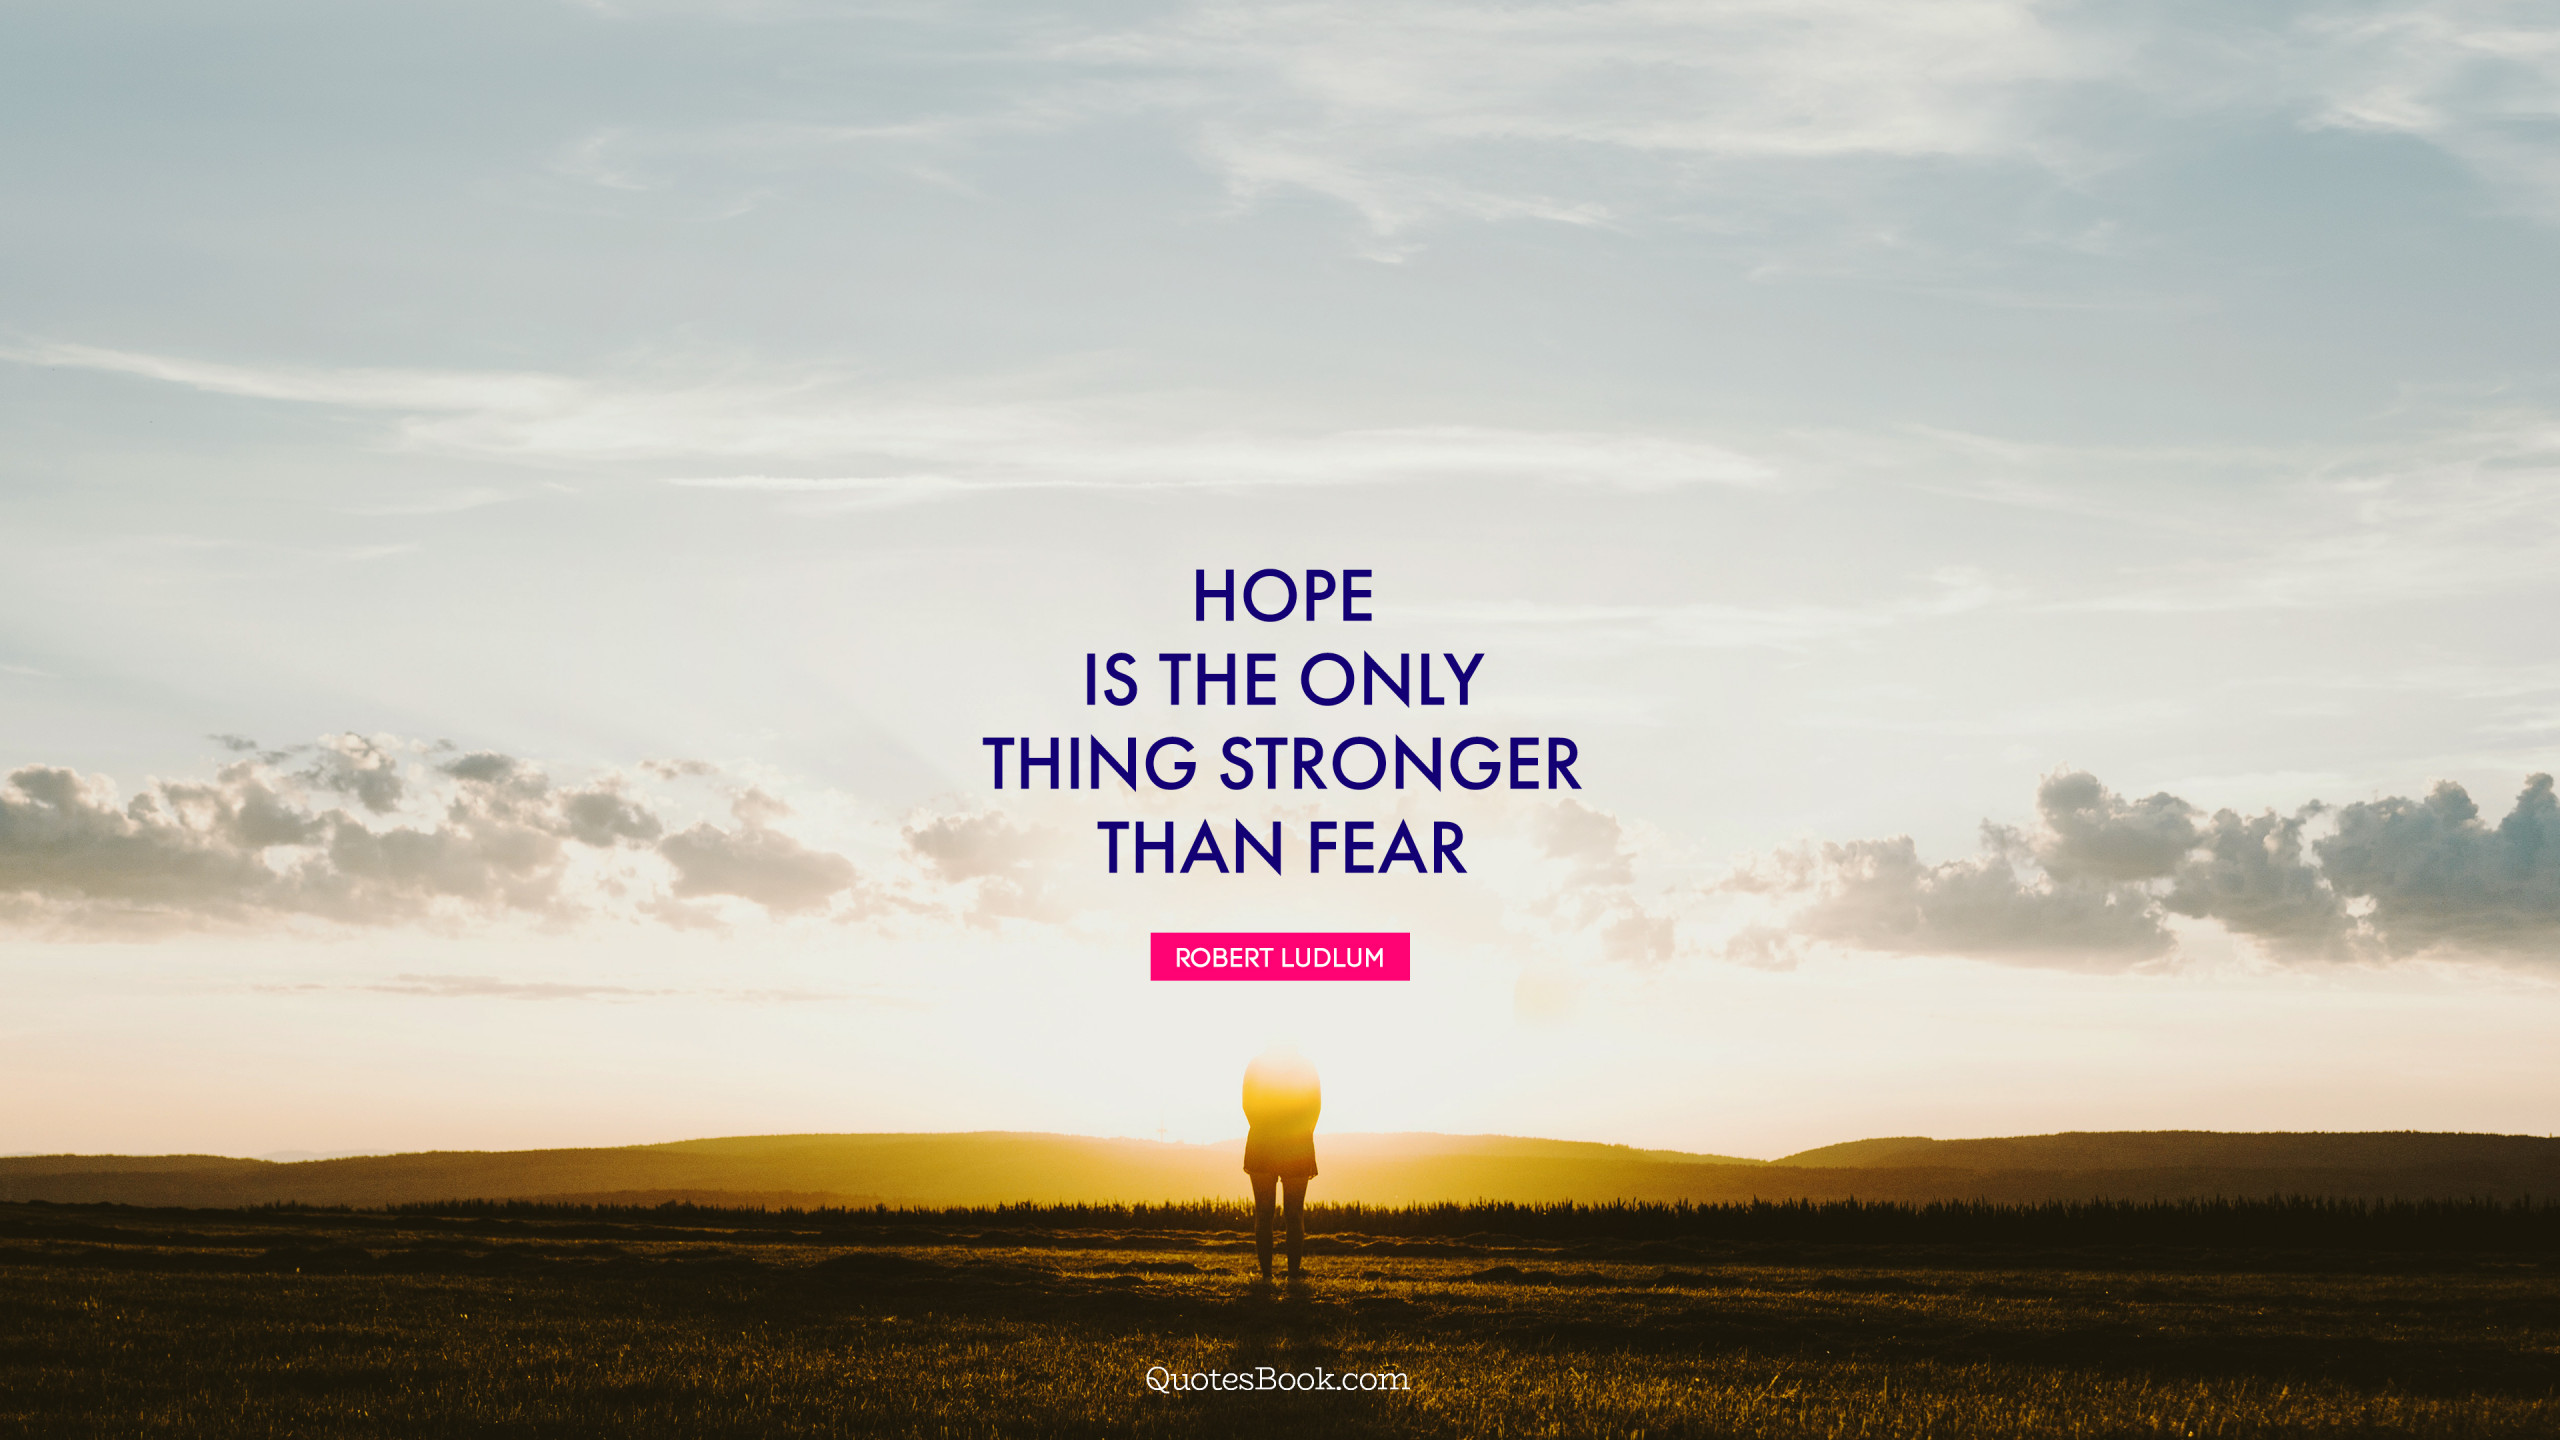 Hope is the only thing stronger than fear. Quote by